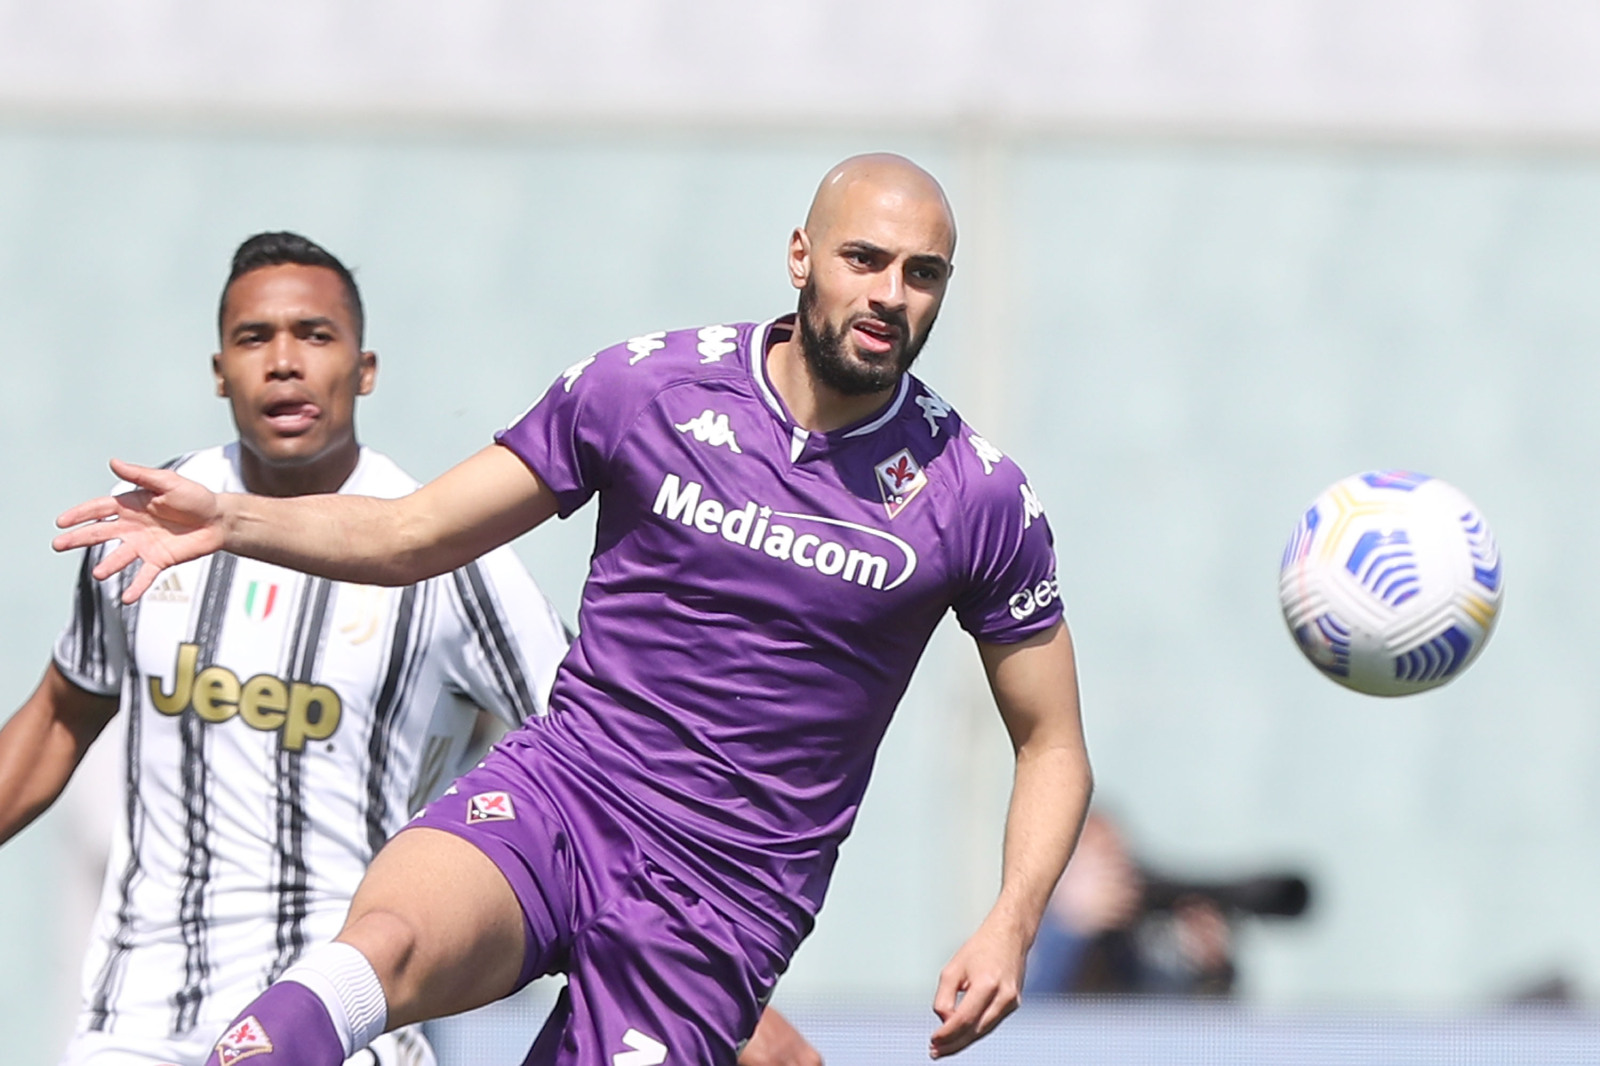 Sofyan Amrabat has been pursued by multiple big clubs this summer, but he’s still at Fiorentina late in the window. The Viola don’t want to wait too long.